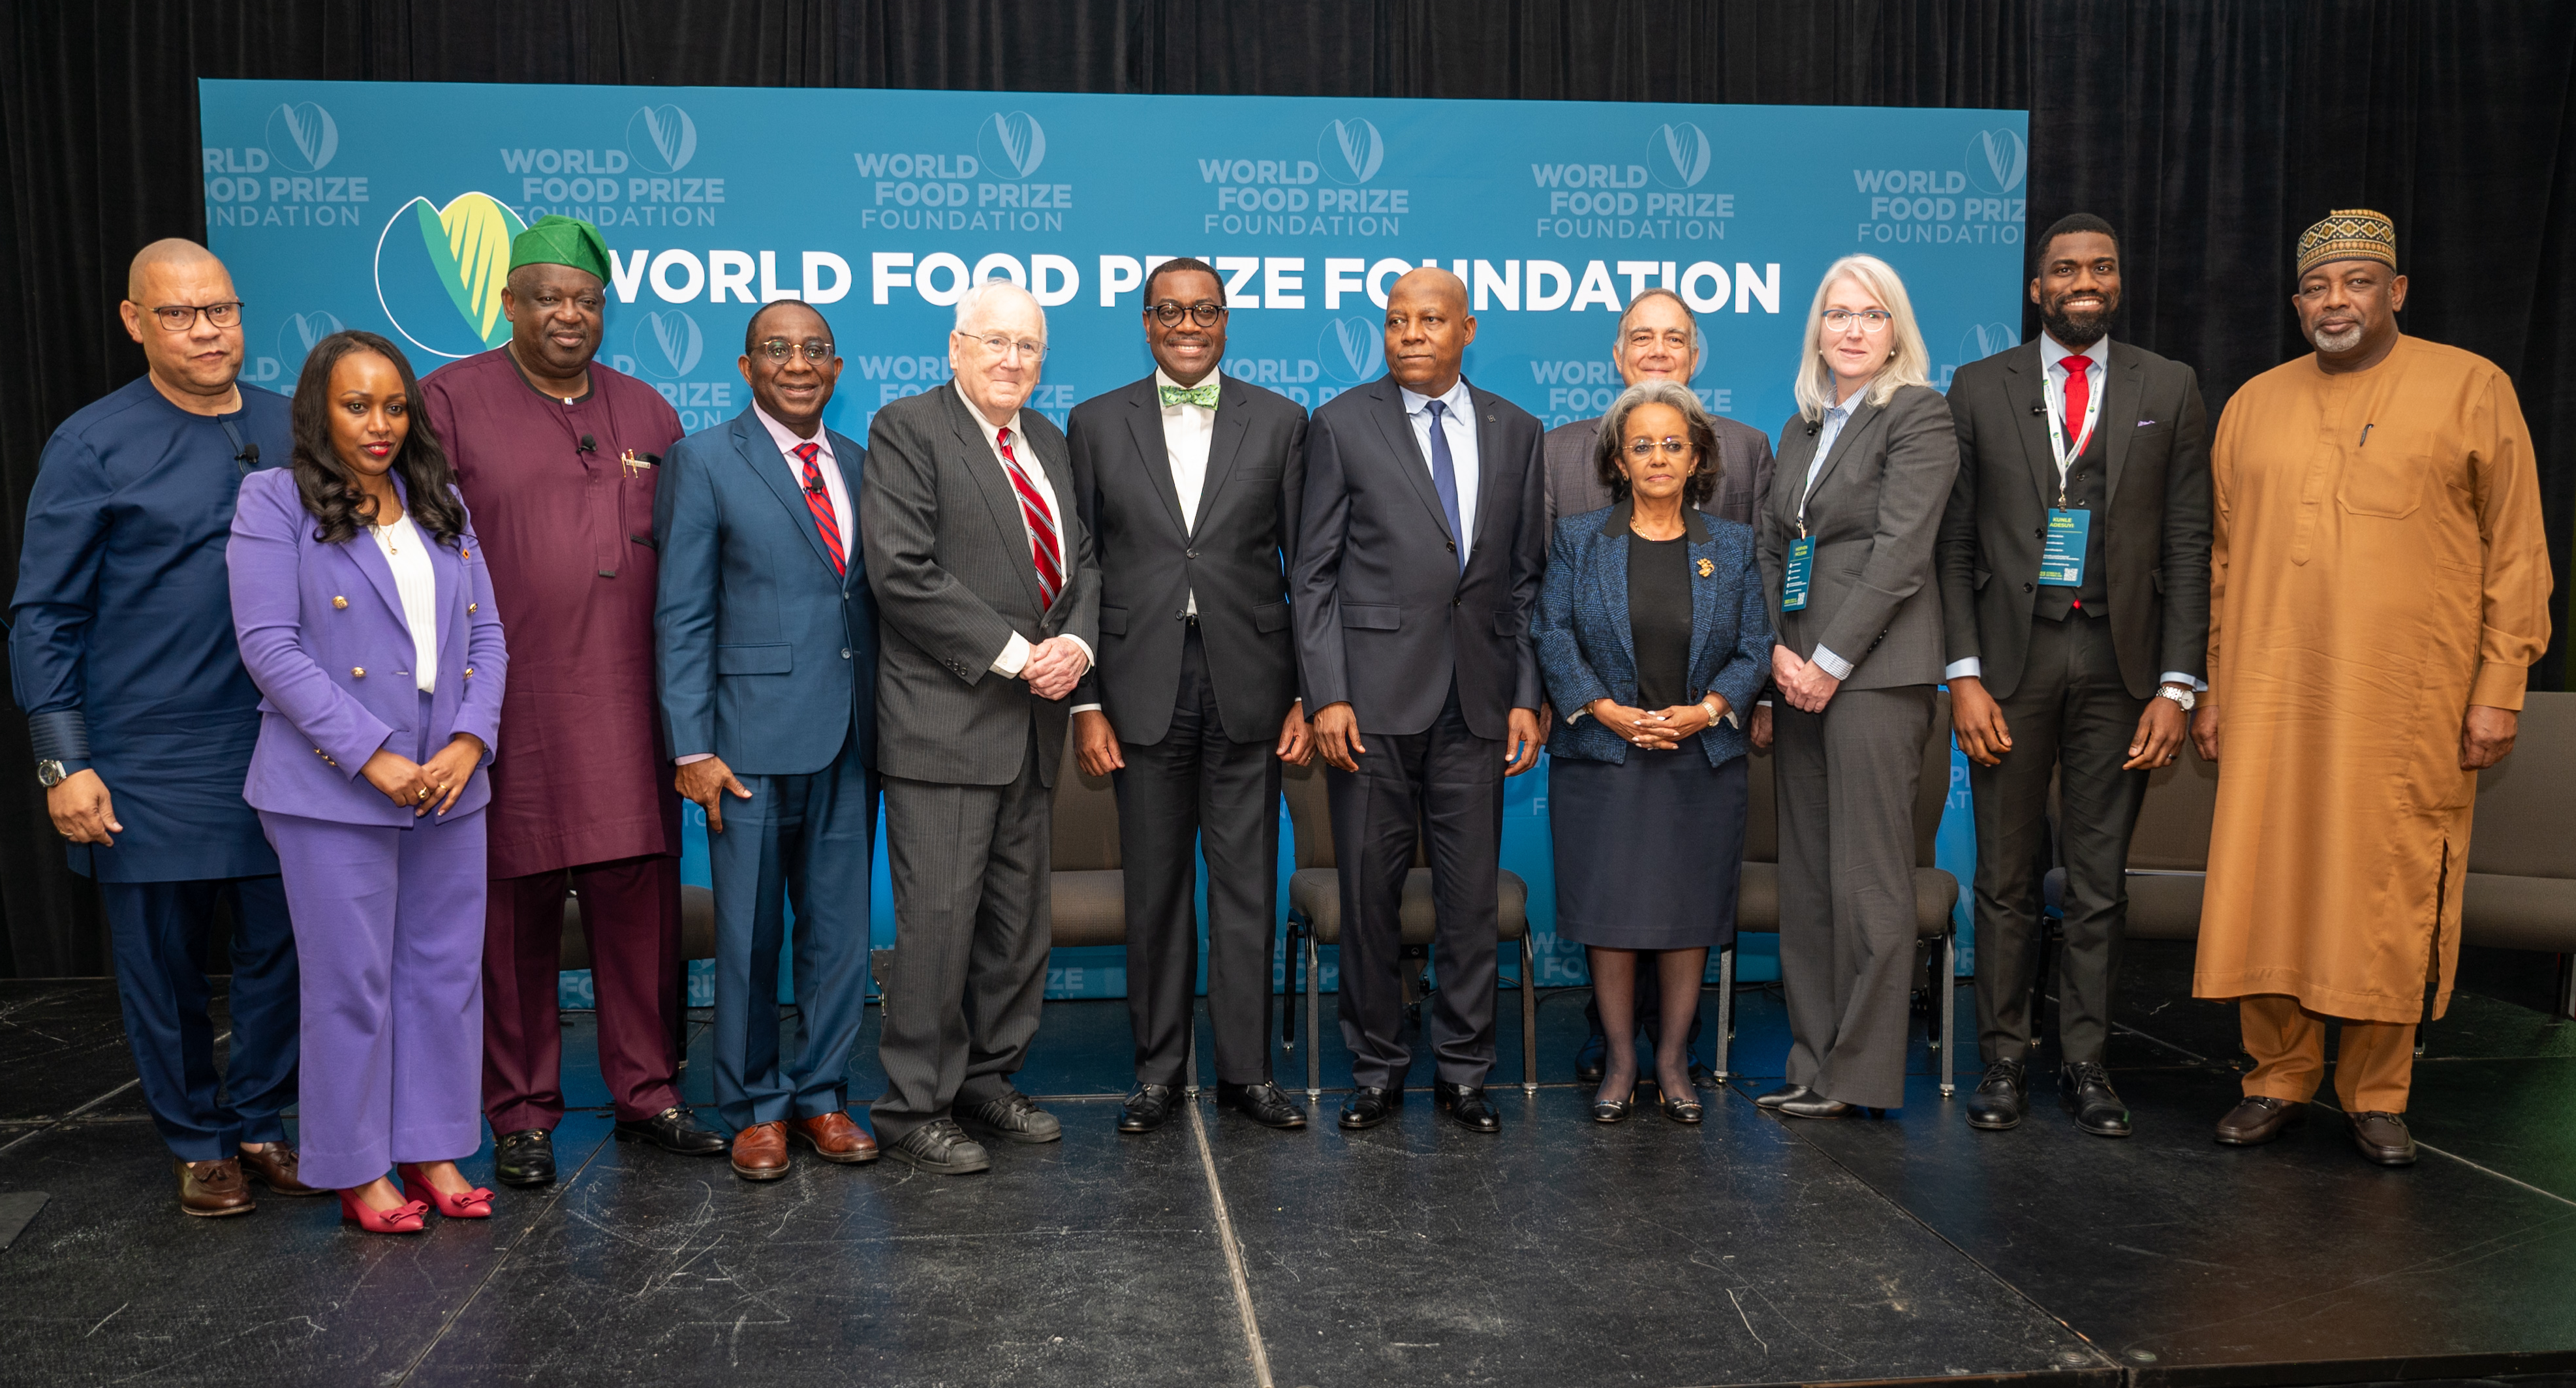 World Food Prize Dialogue: Don’t Overlook Africa’s Potential, Says AfDB